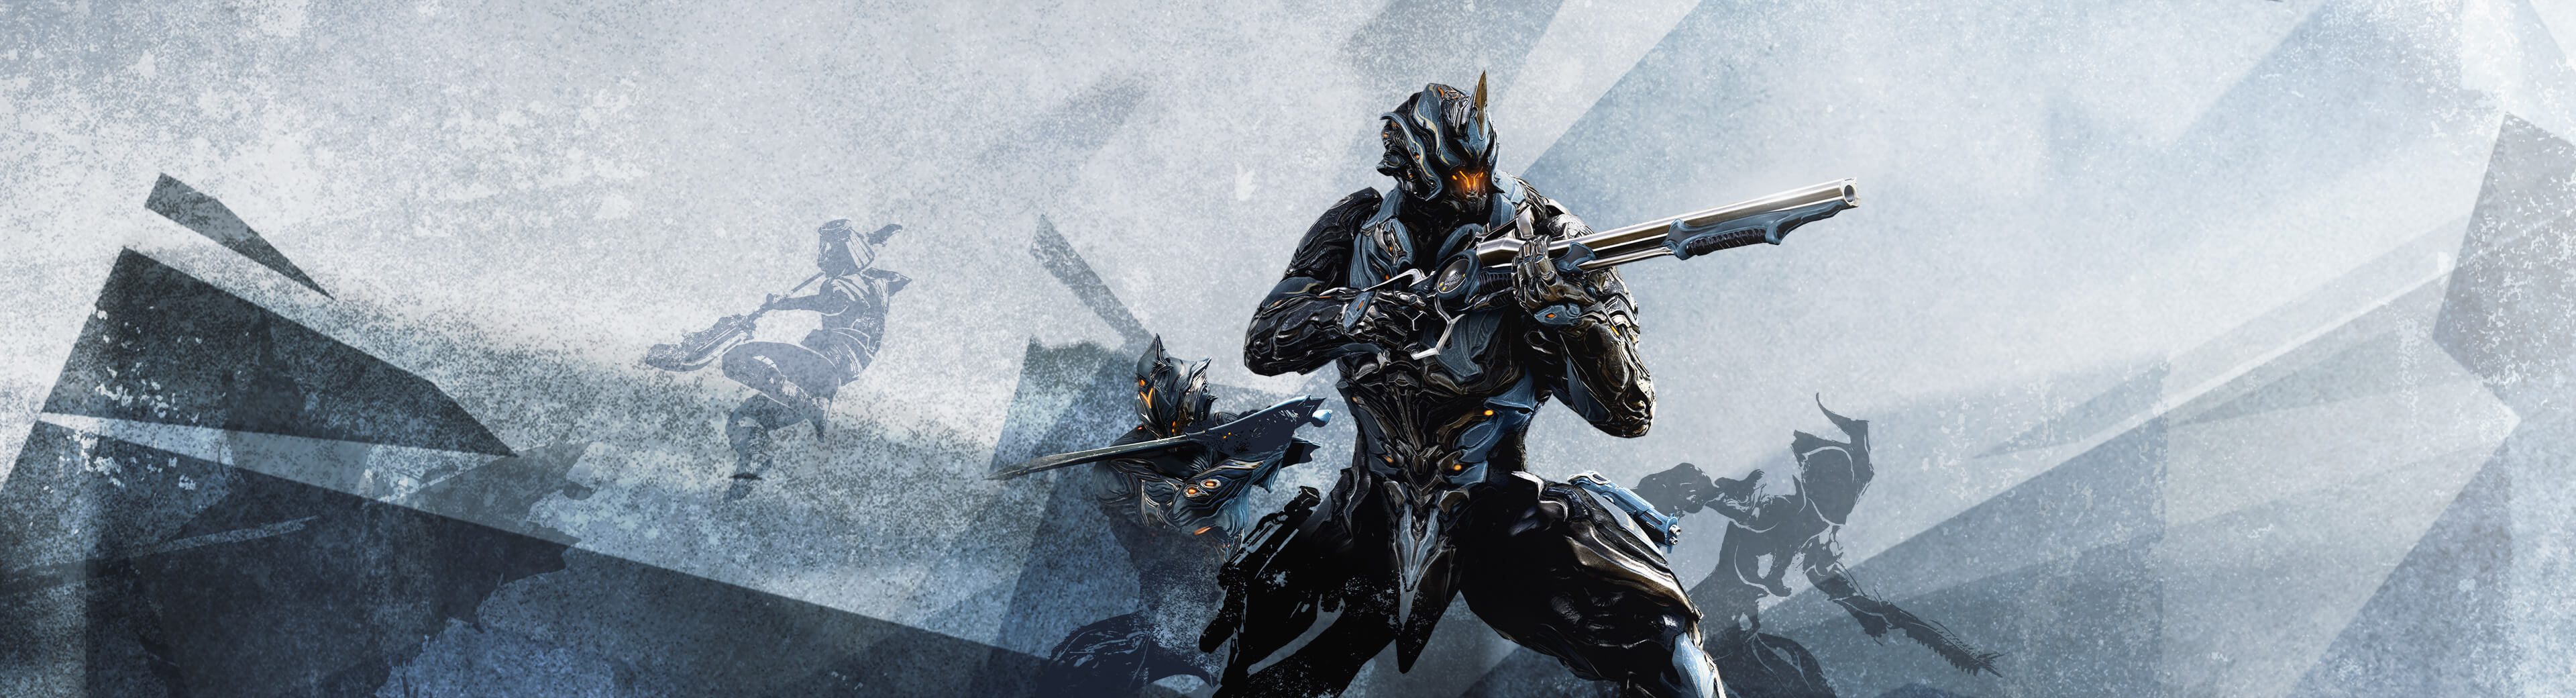 CELEBRATE WARFRAME’S 8TH ANNIVERSARY WITH FREE REWARDS AND MORE TODAY